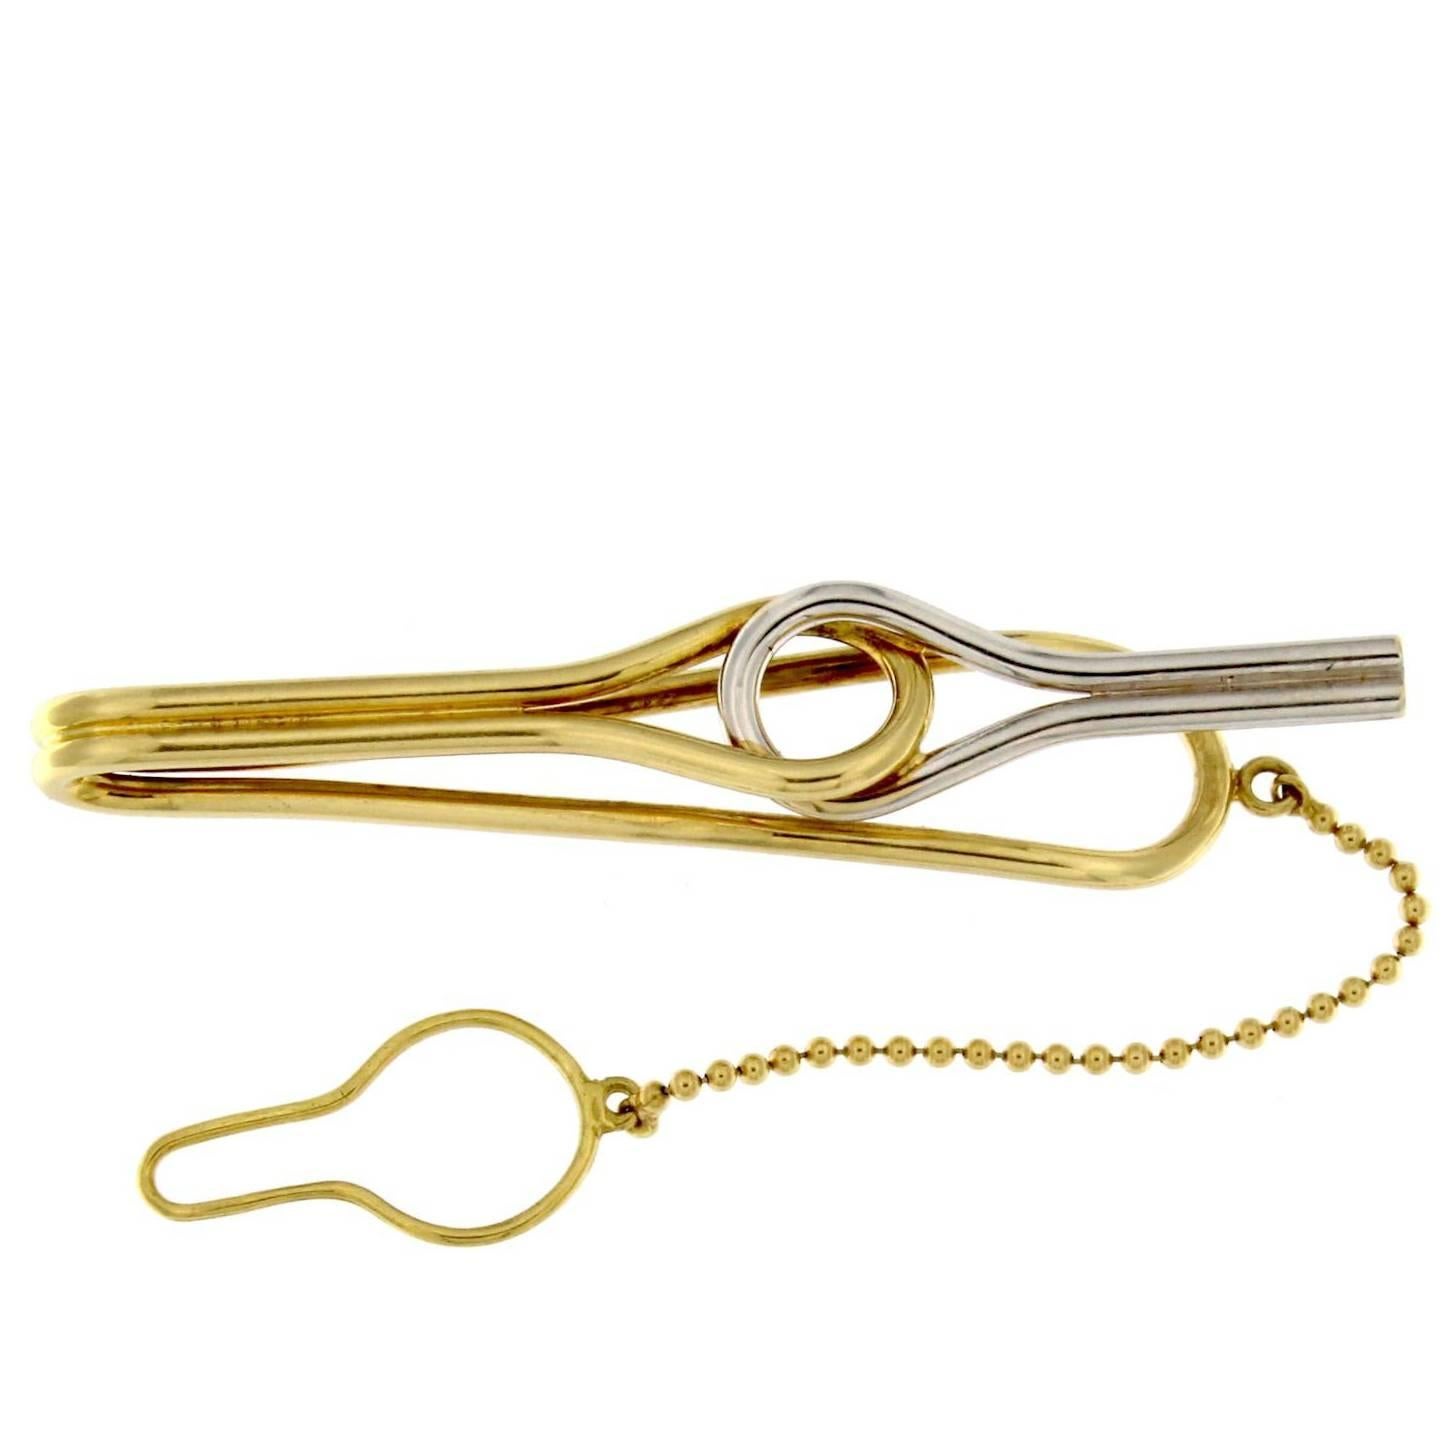 Tie Clip in 18 Karat White and Yellow Gold